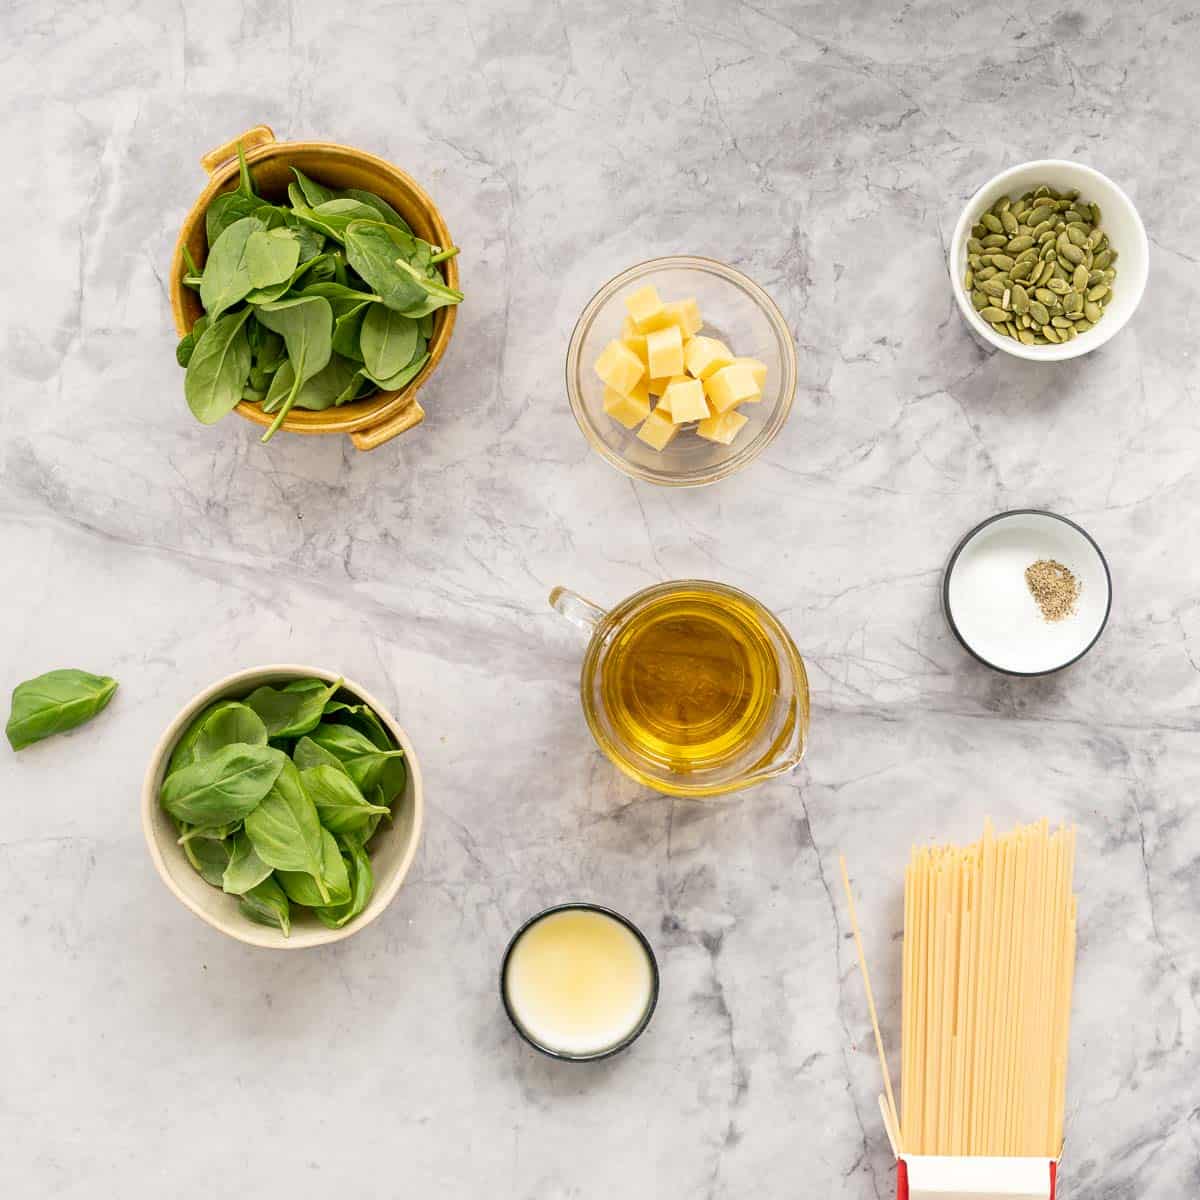 All the ingredients to make the Pesto Pasta laid out on the bench in small ramekins and jugs